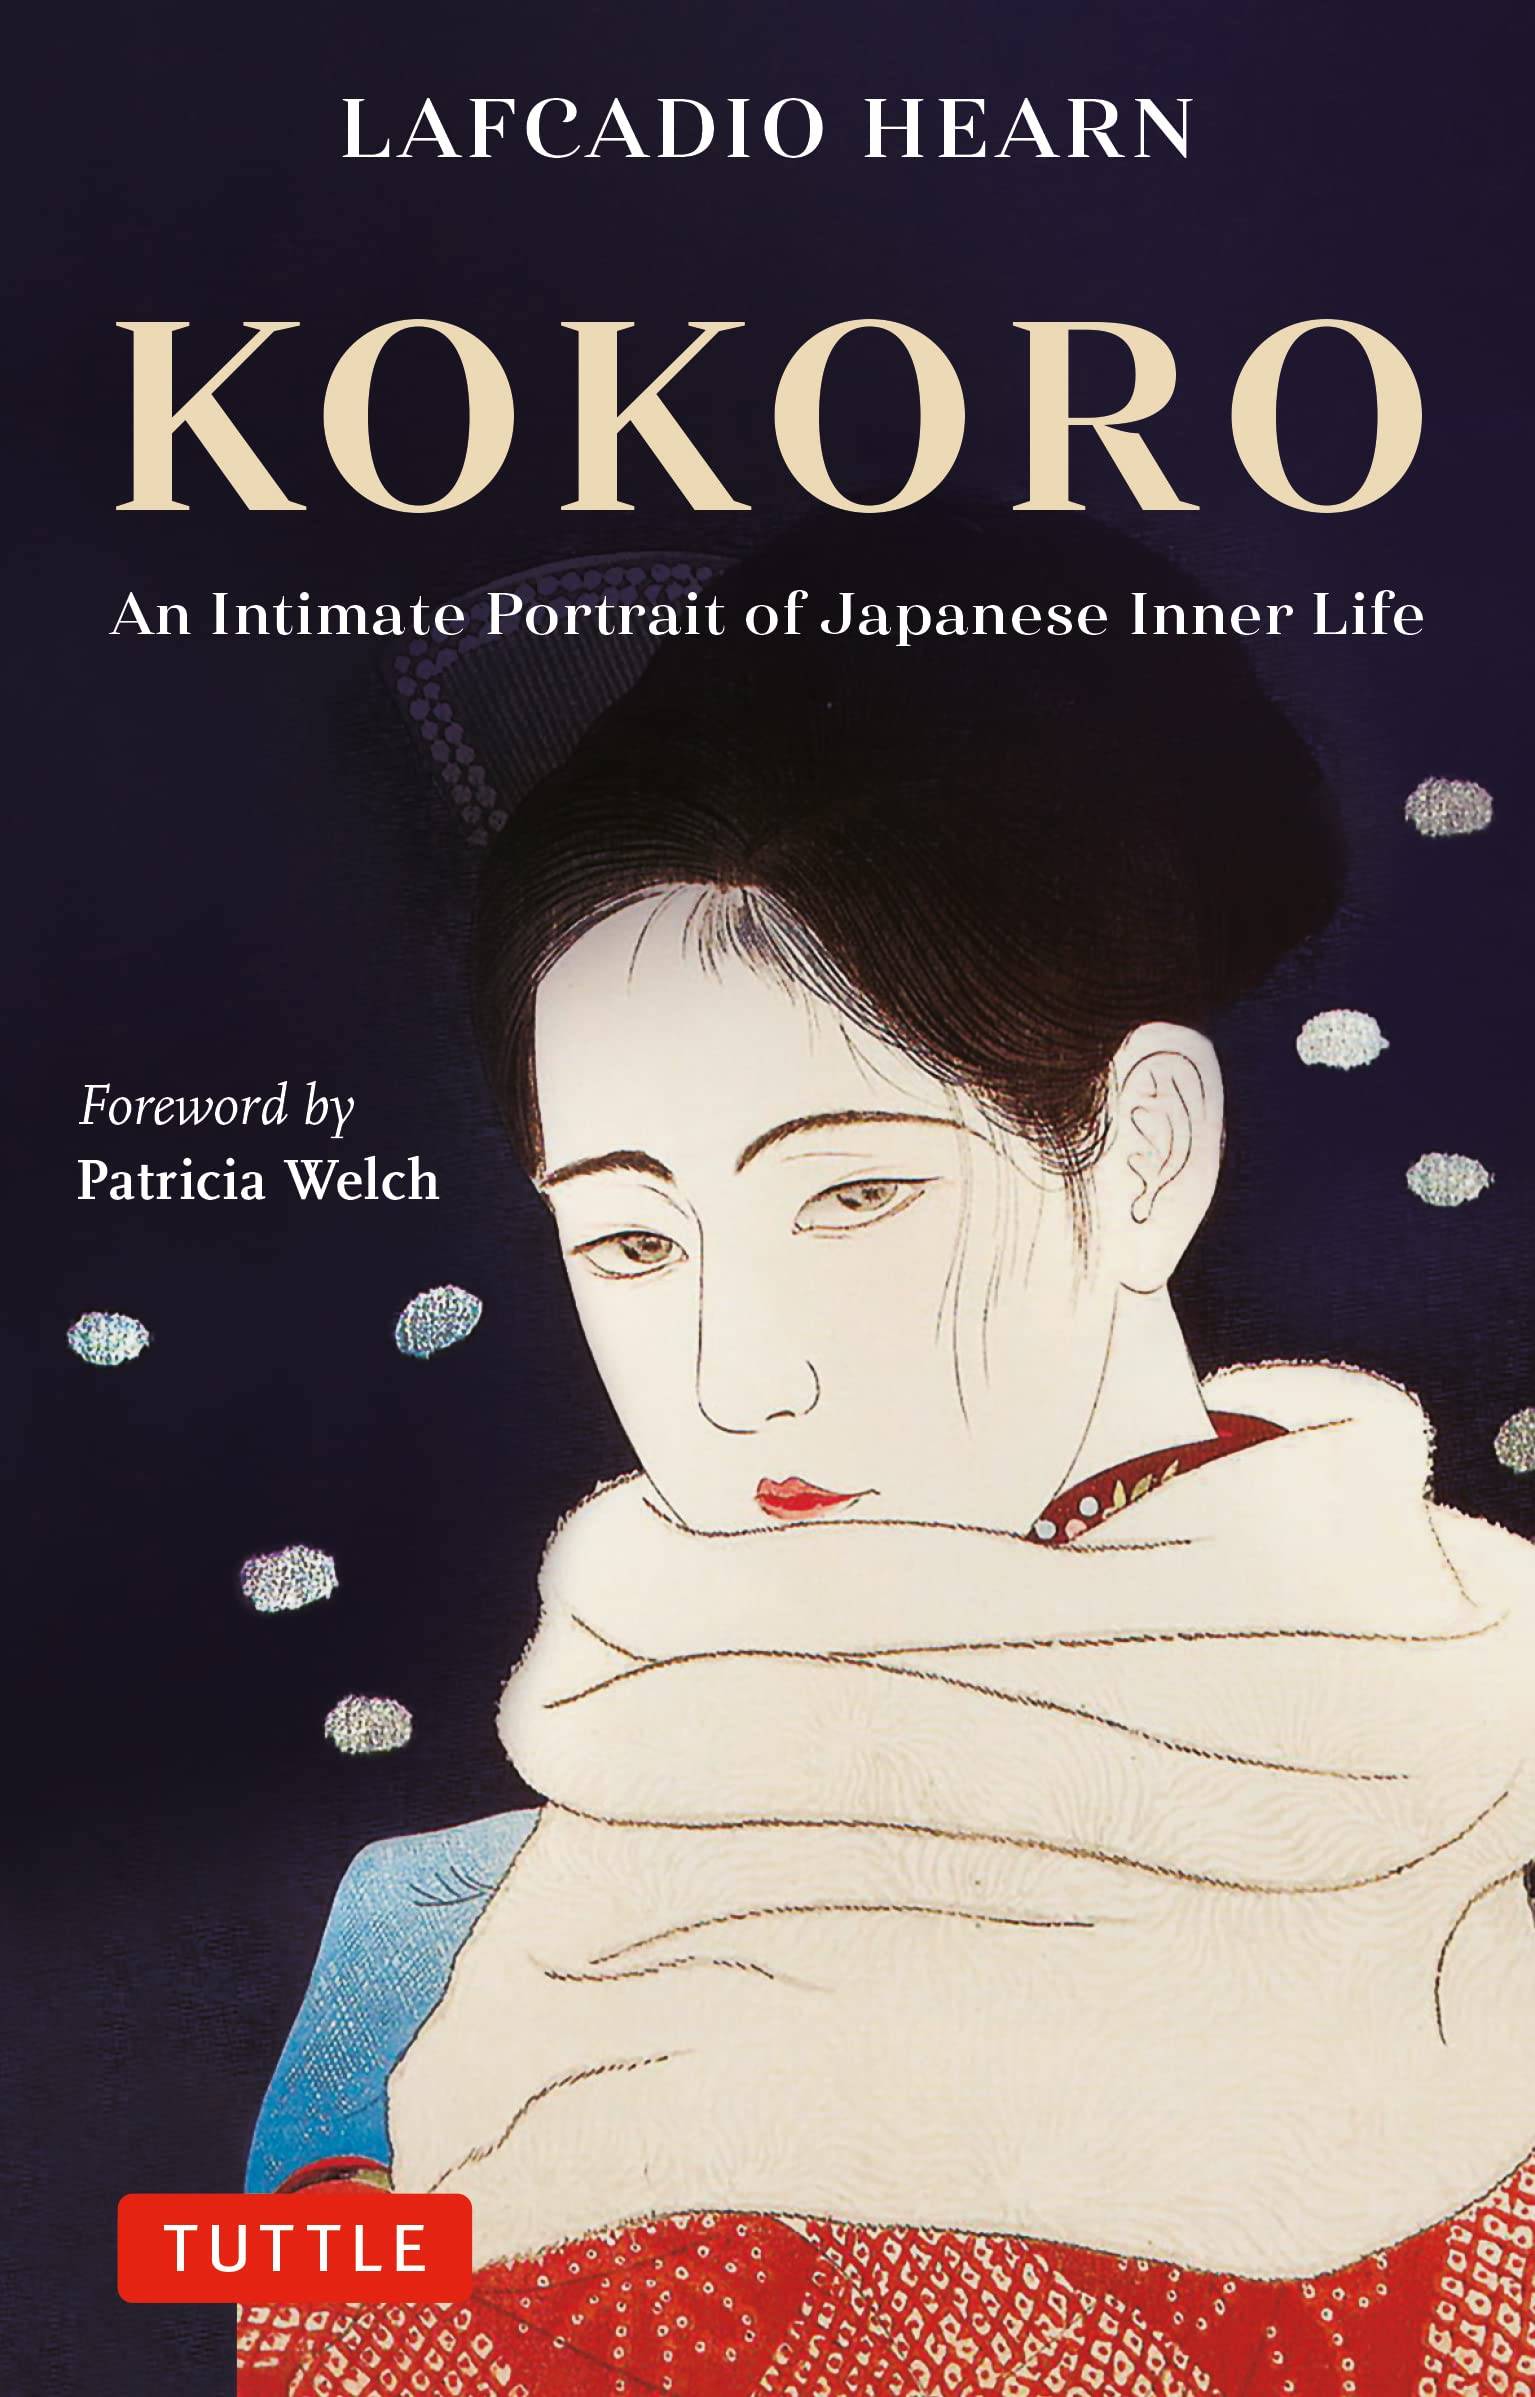 Kokoro is an excellent novel though it is short!